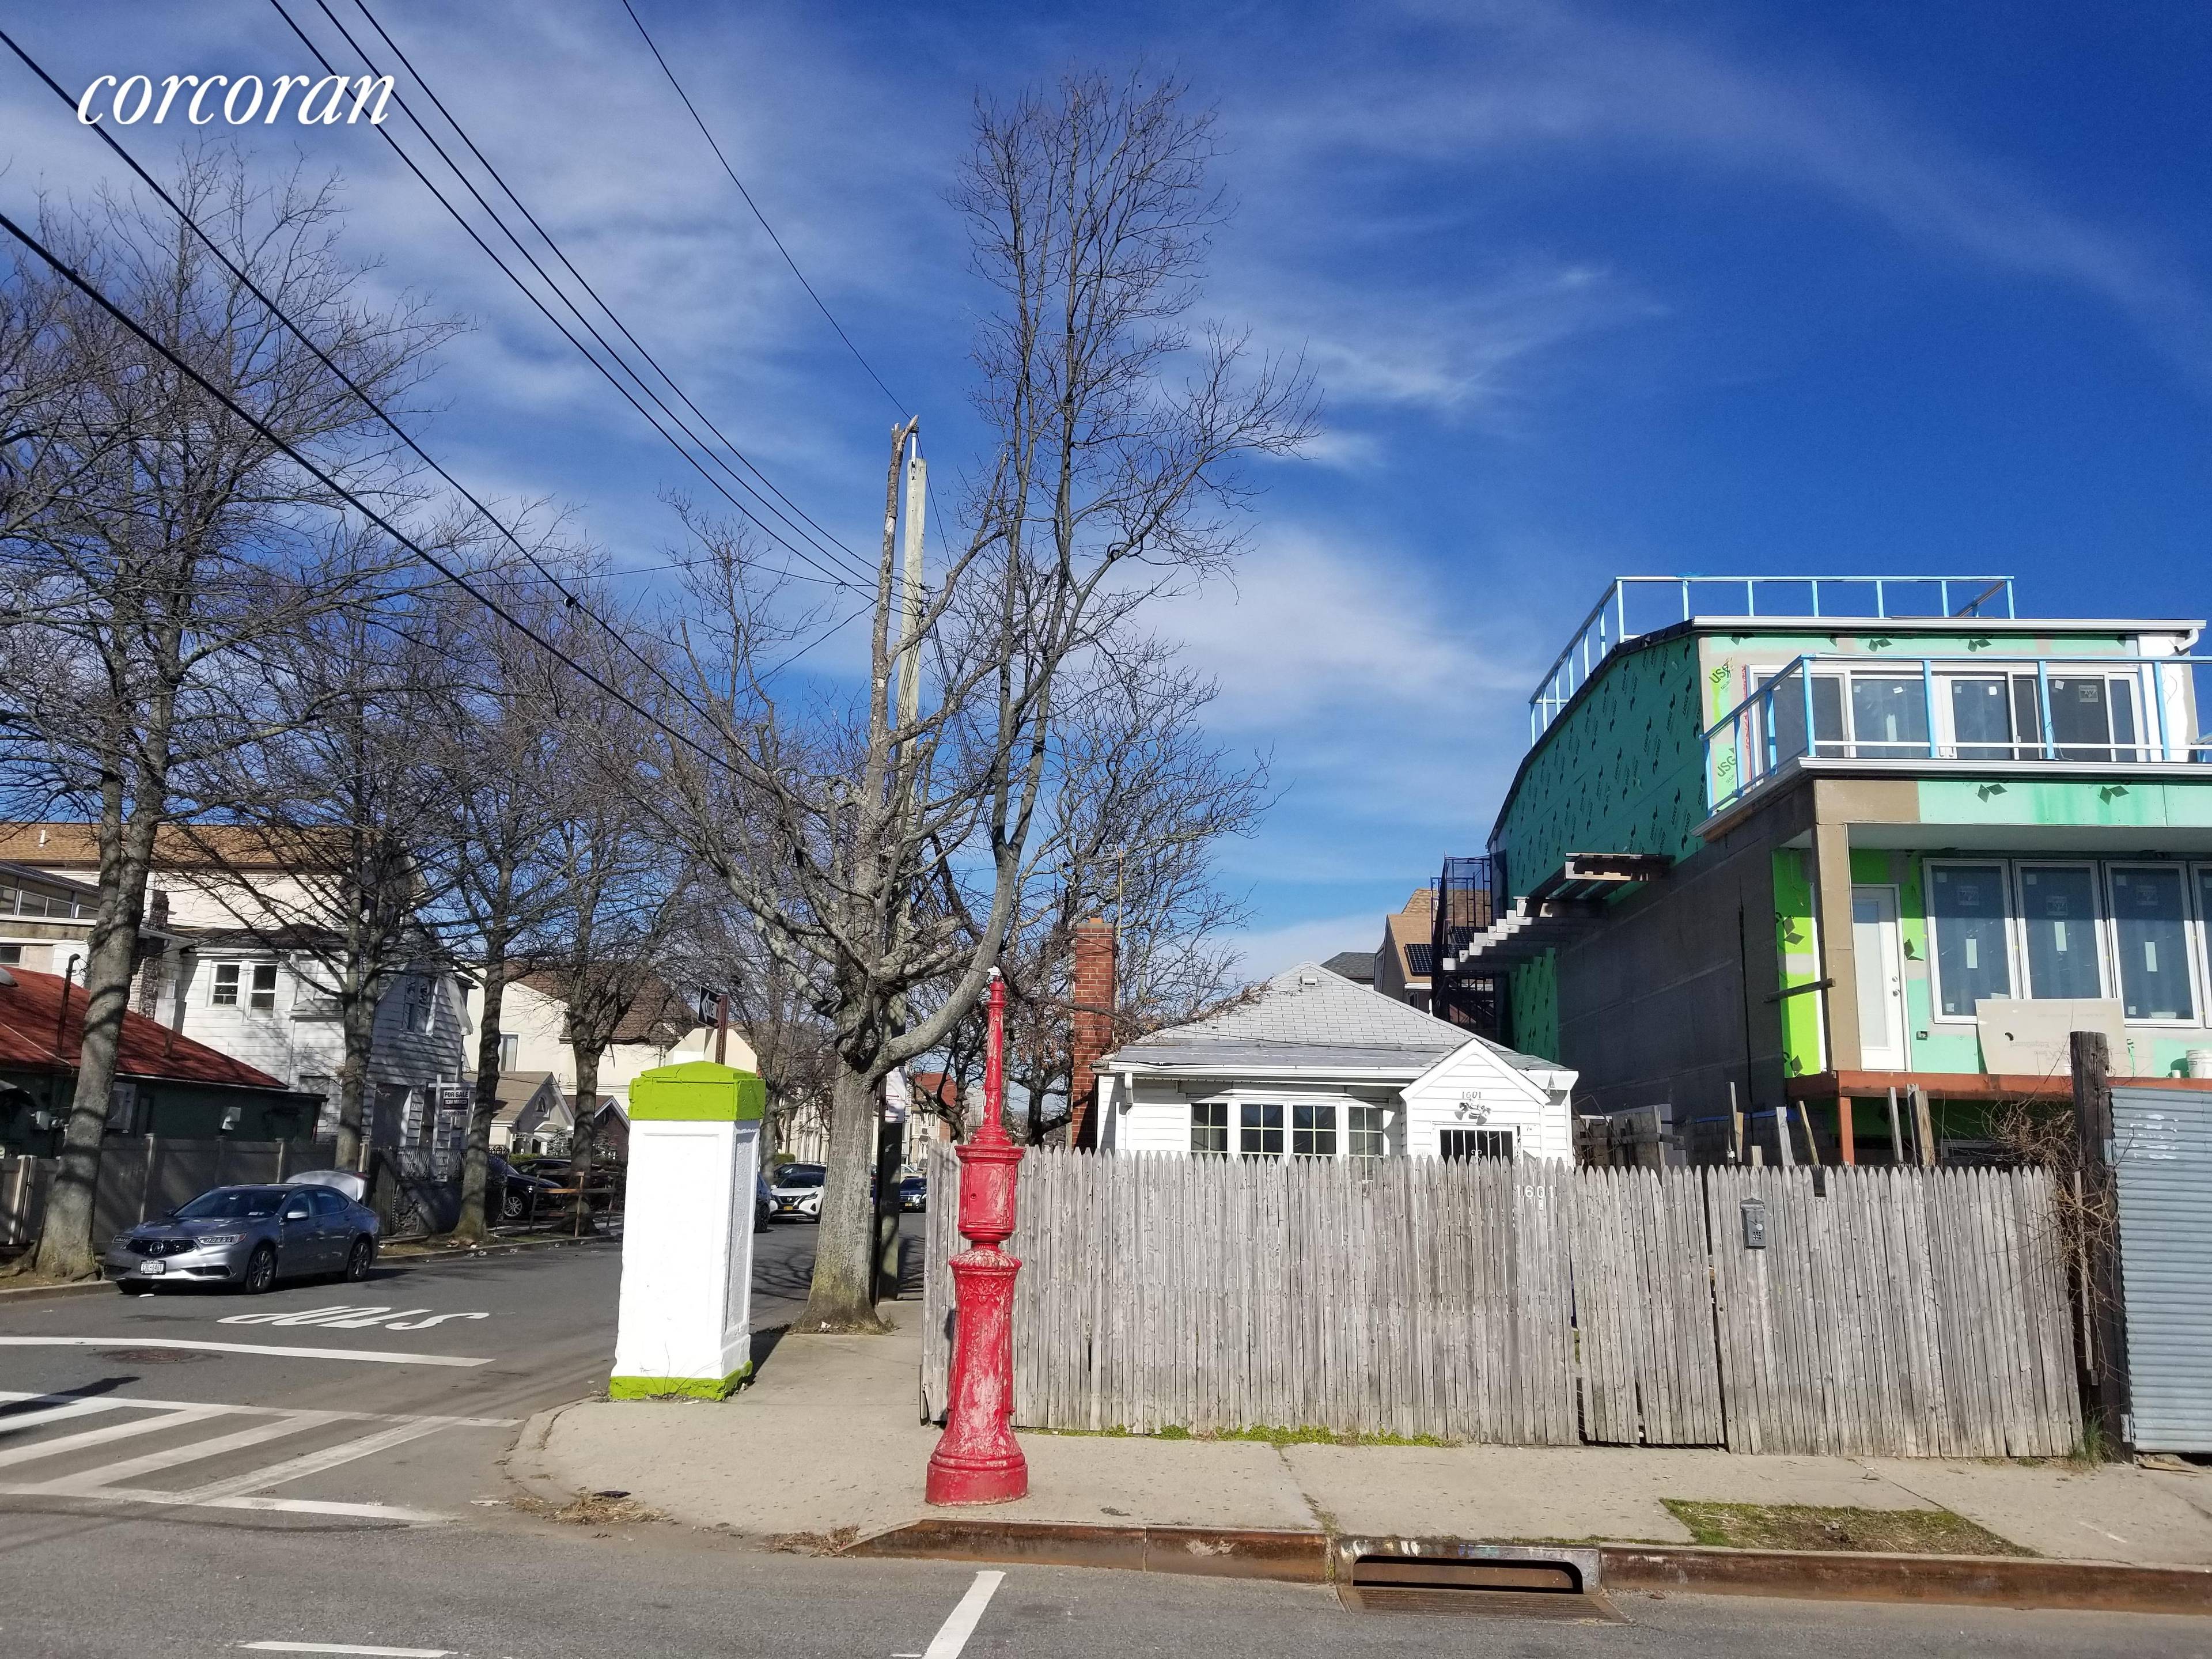 Here is your chance to live in the heart of Manhattan Beach on a coveted corner lot across from Manhattan Beach Park and Sheepshead Bay Harbor.